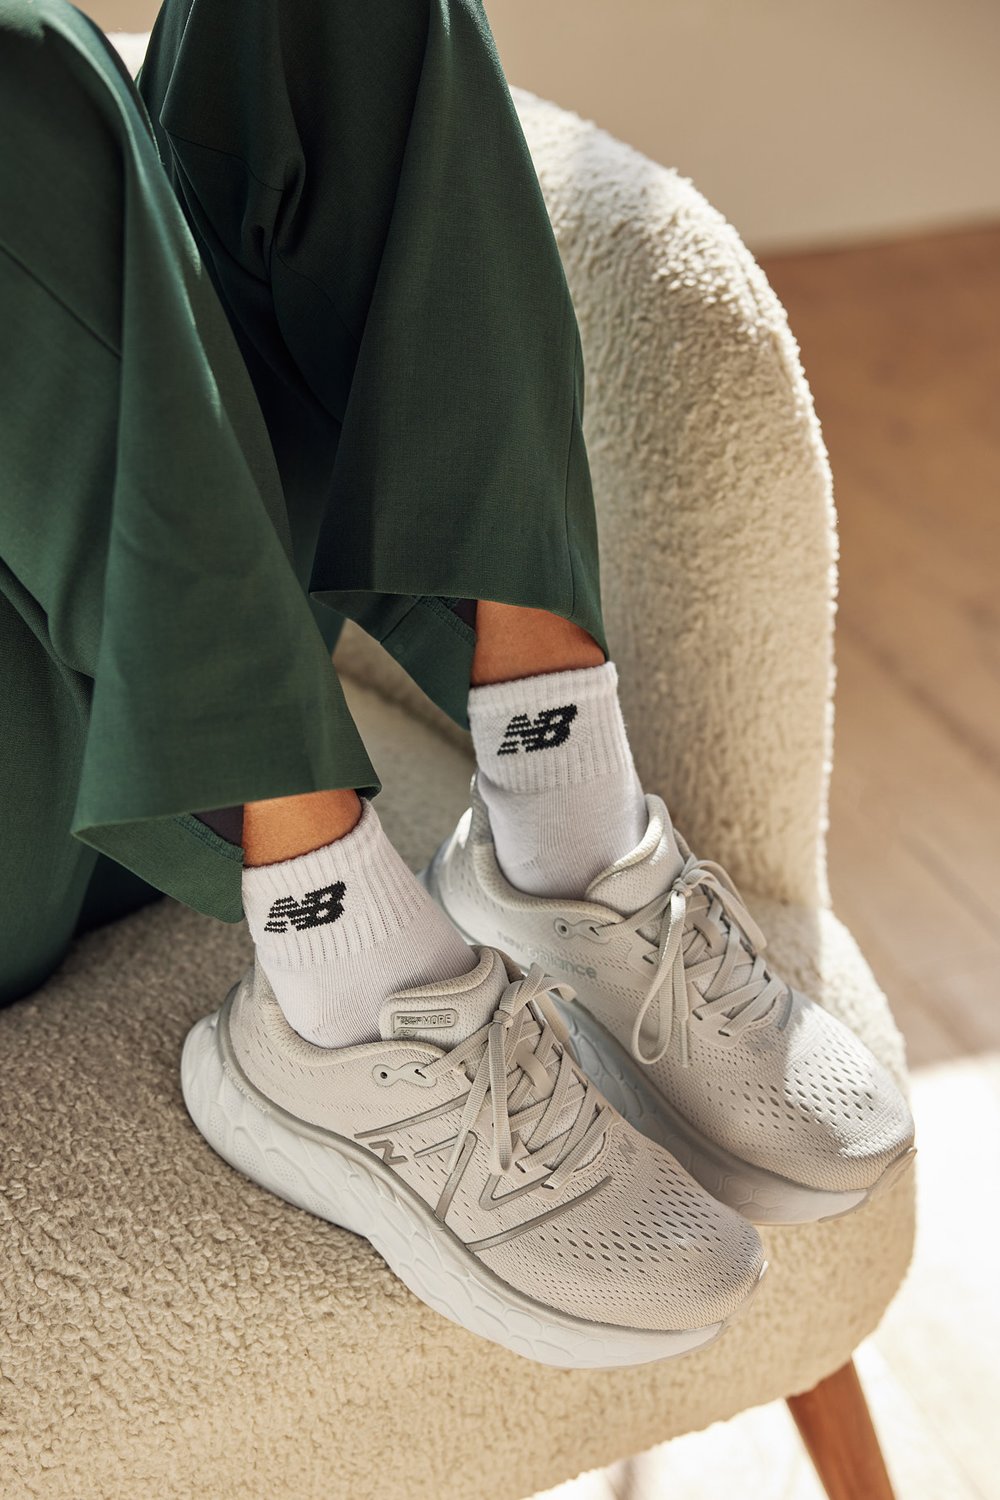 Clean white New Balance shoes and socks on a furry couch or chair. 